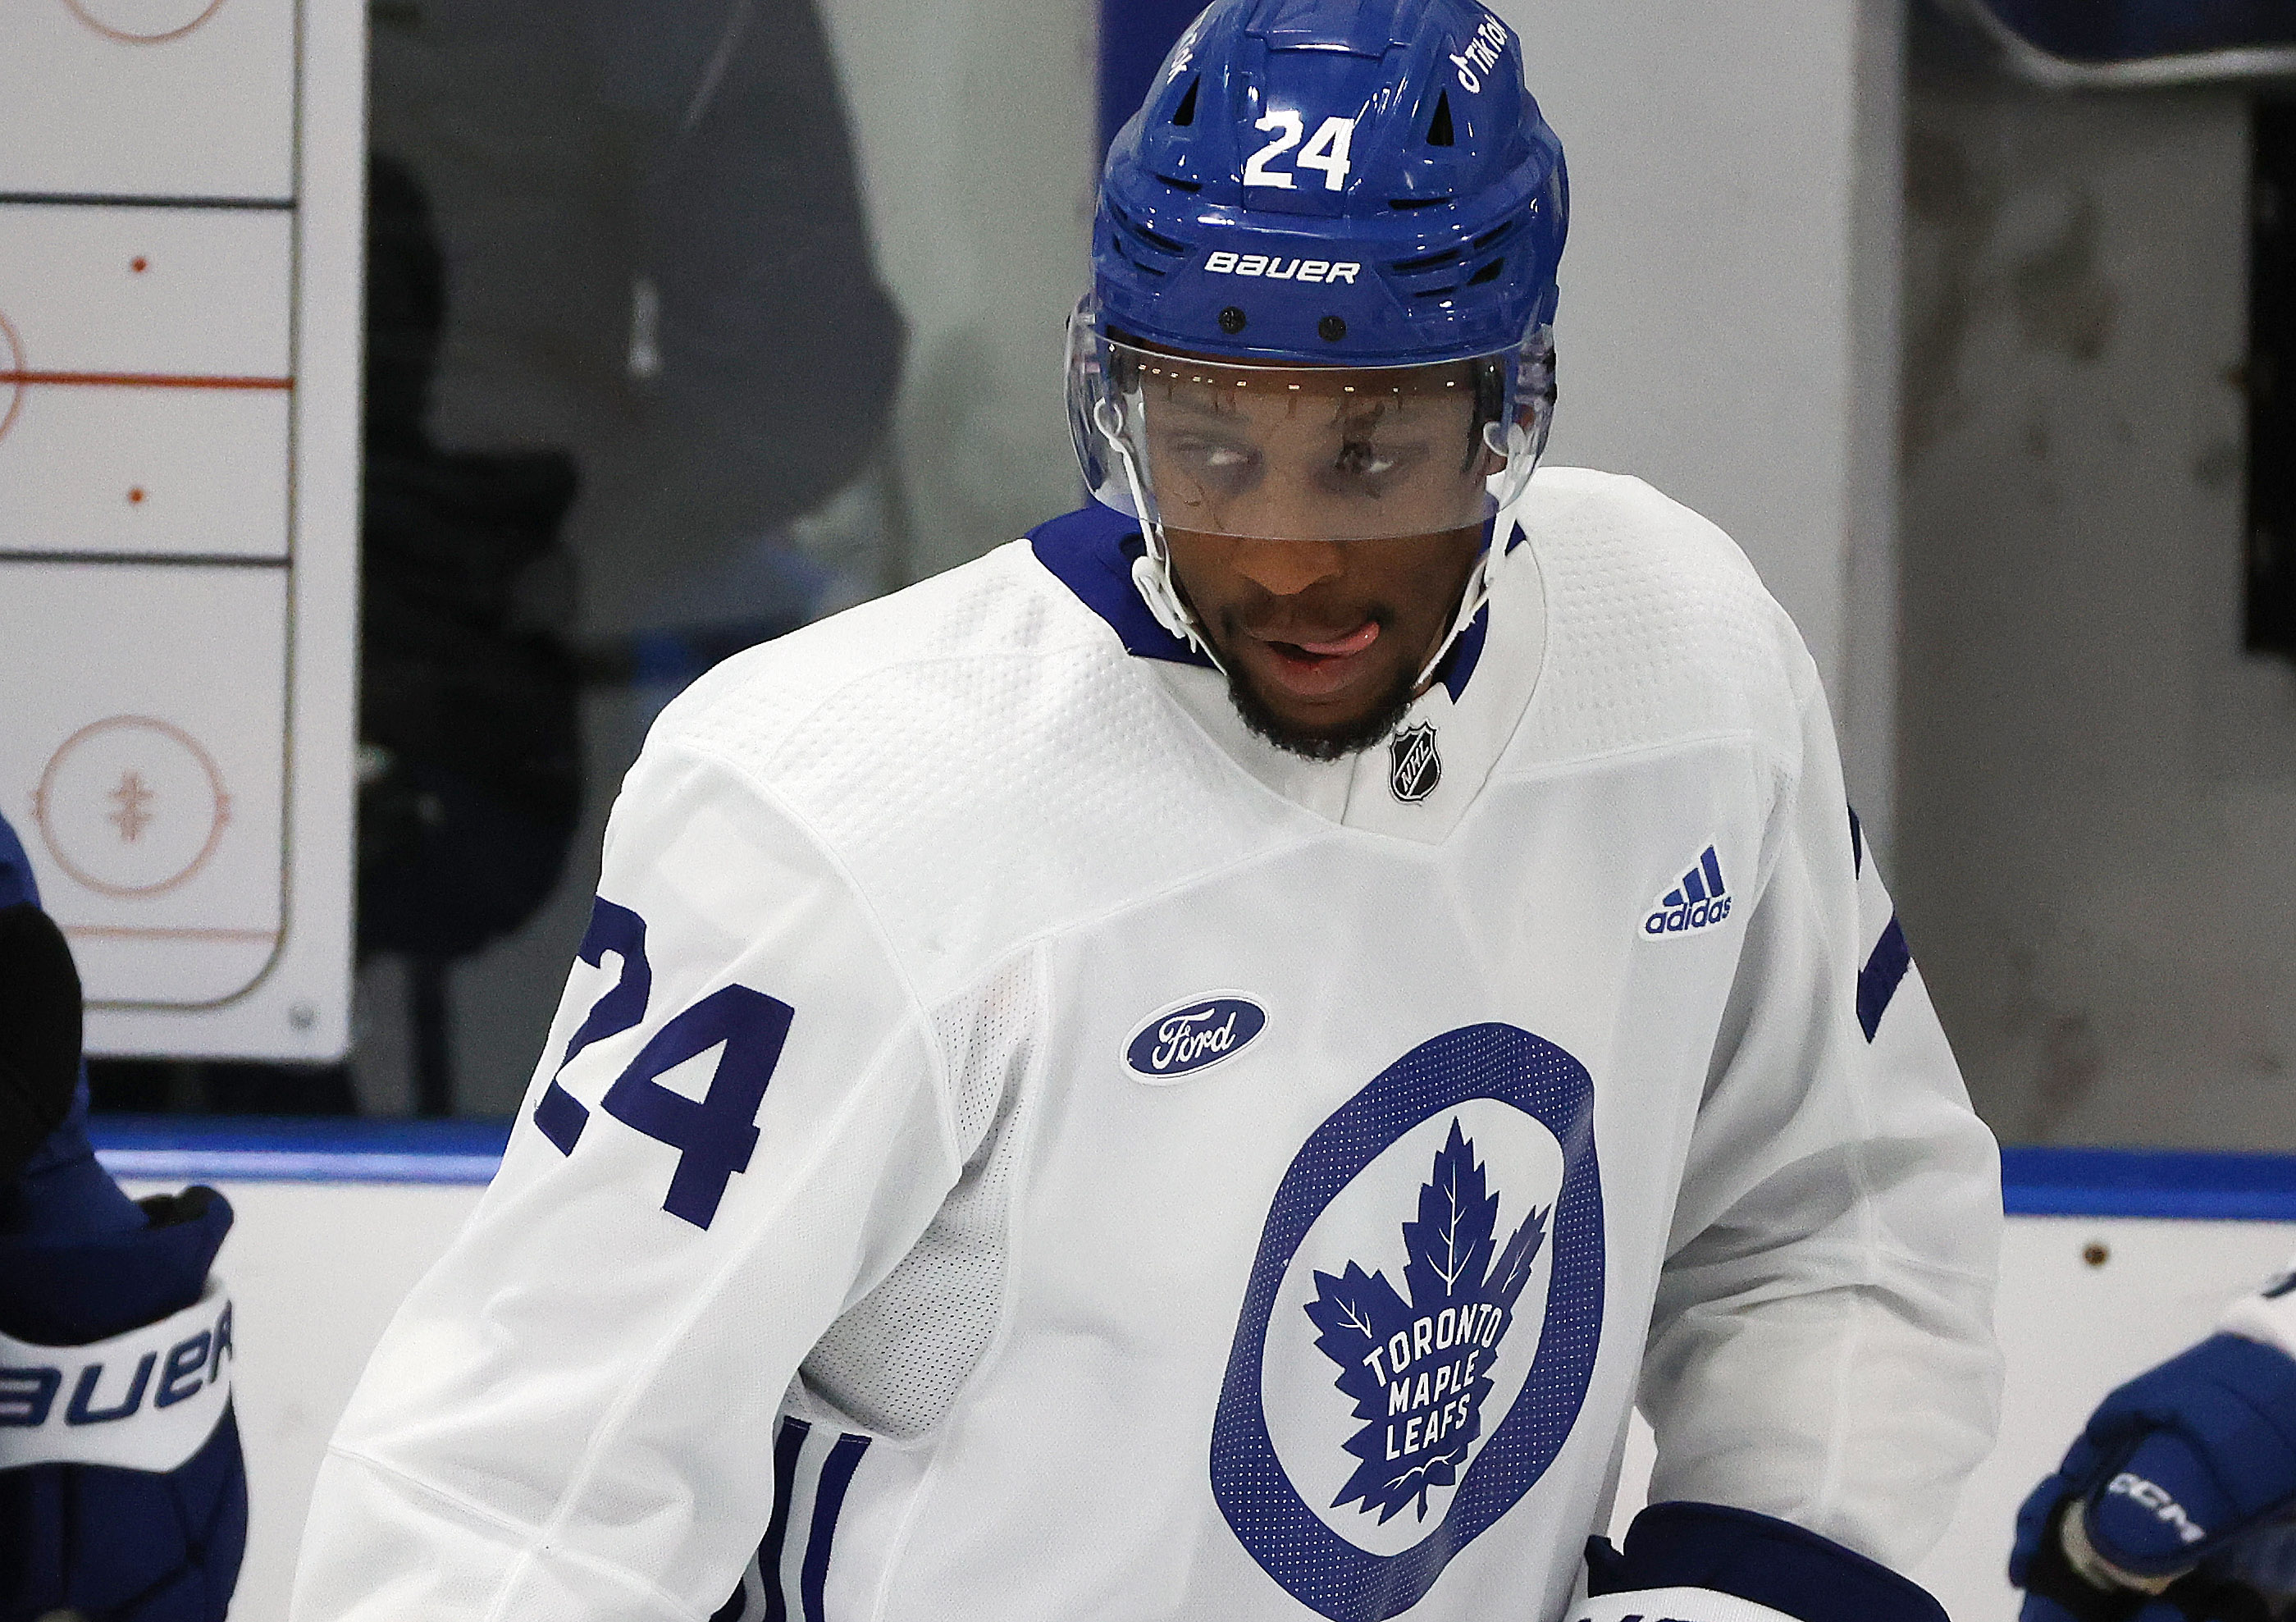 The Toronto Maple Leafs open their training camp for the 2022-23 season